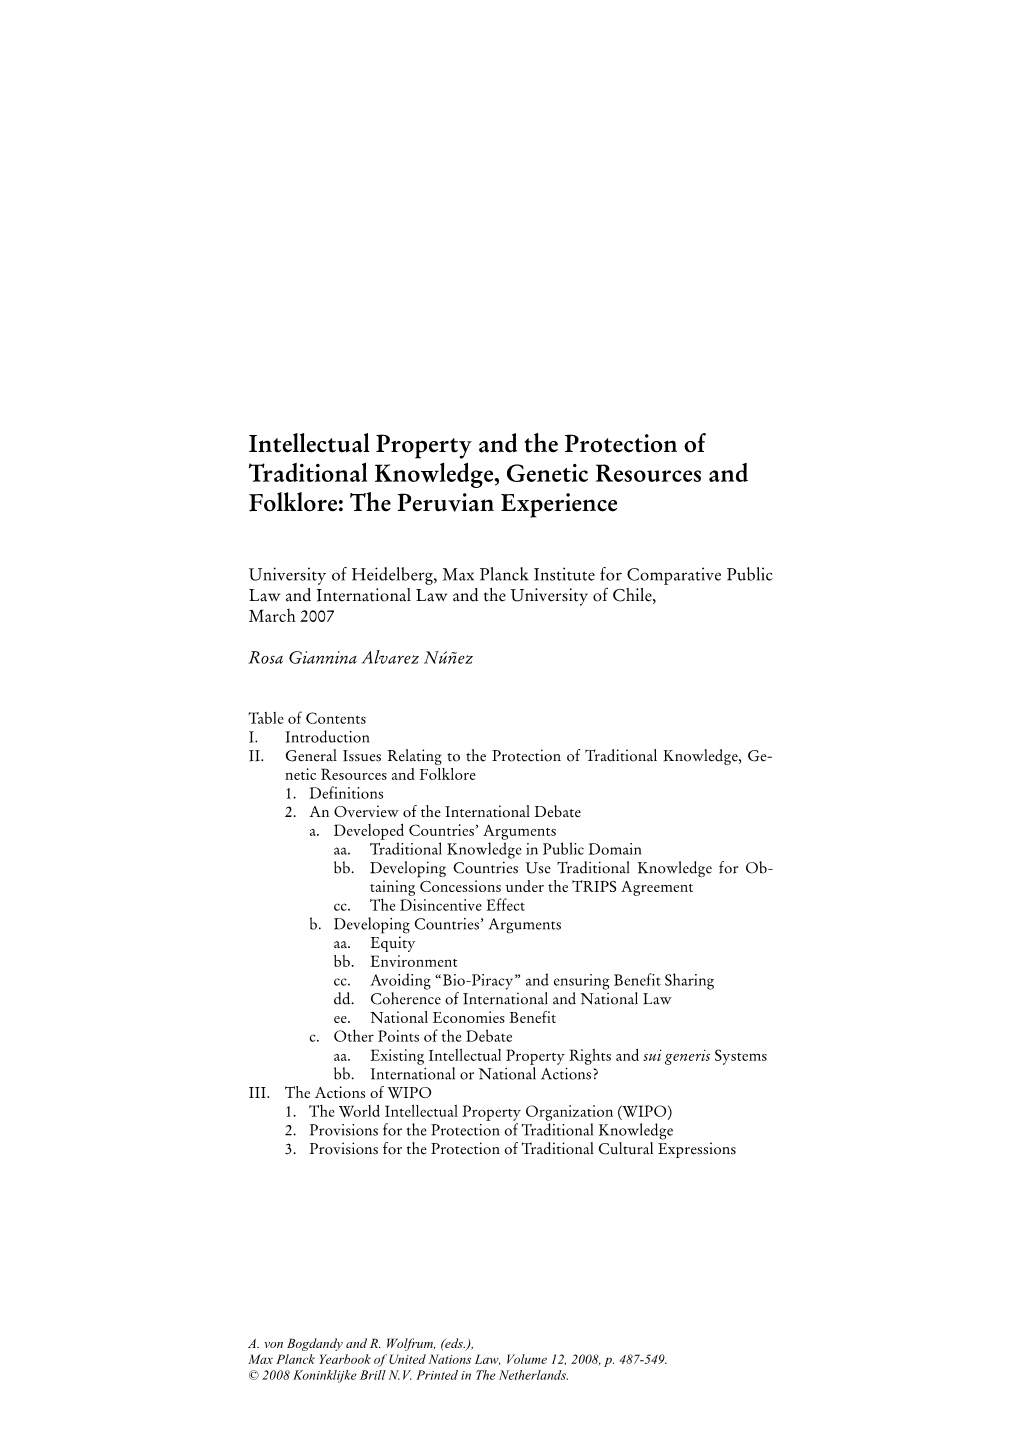 Intellectual Property and the Protection of Traditional Knowledge, Genetic Resources and Folklore: the Peruvian Experience